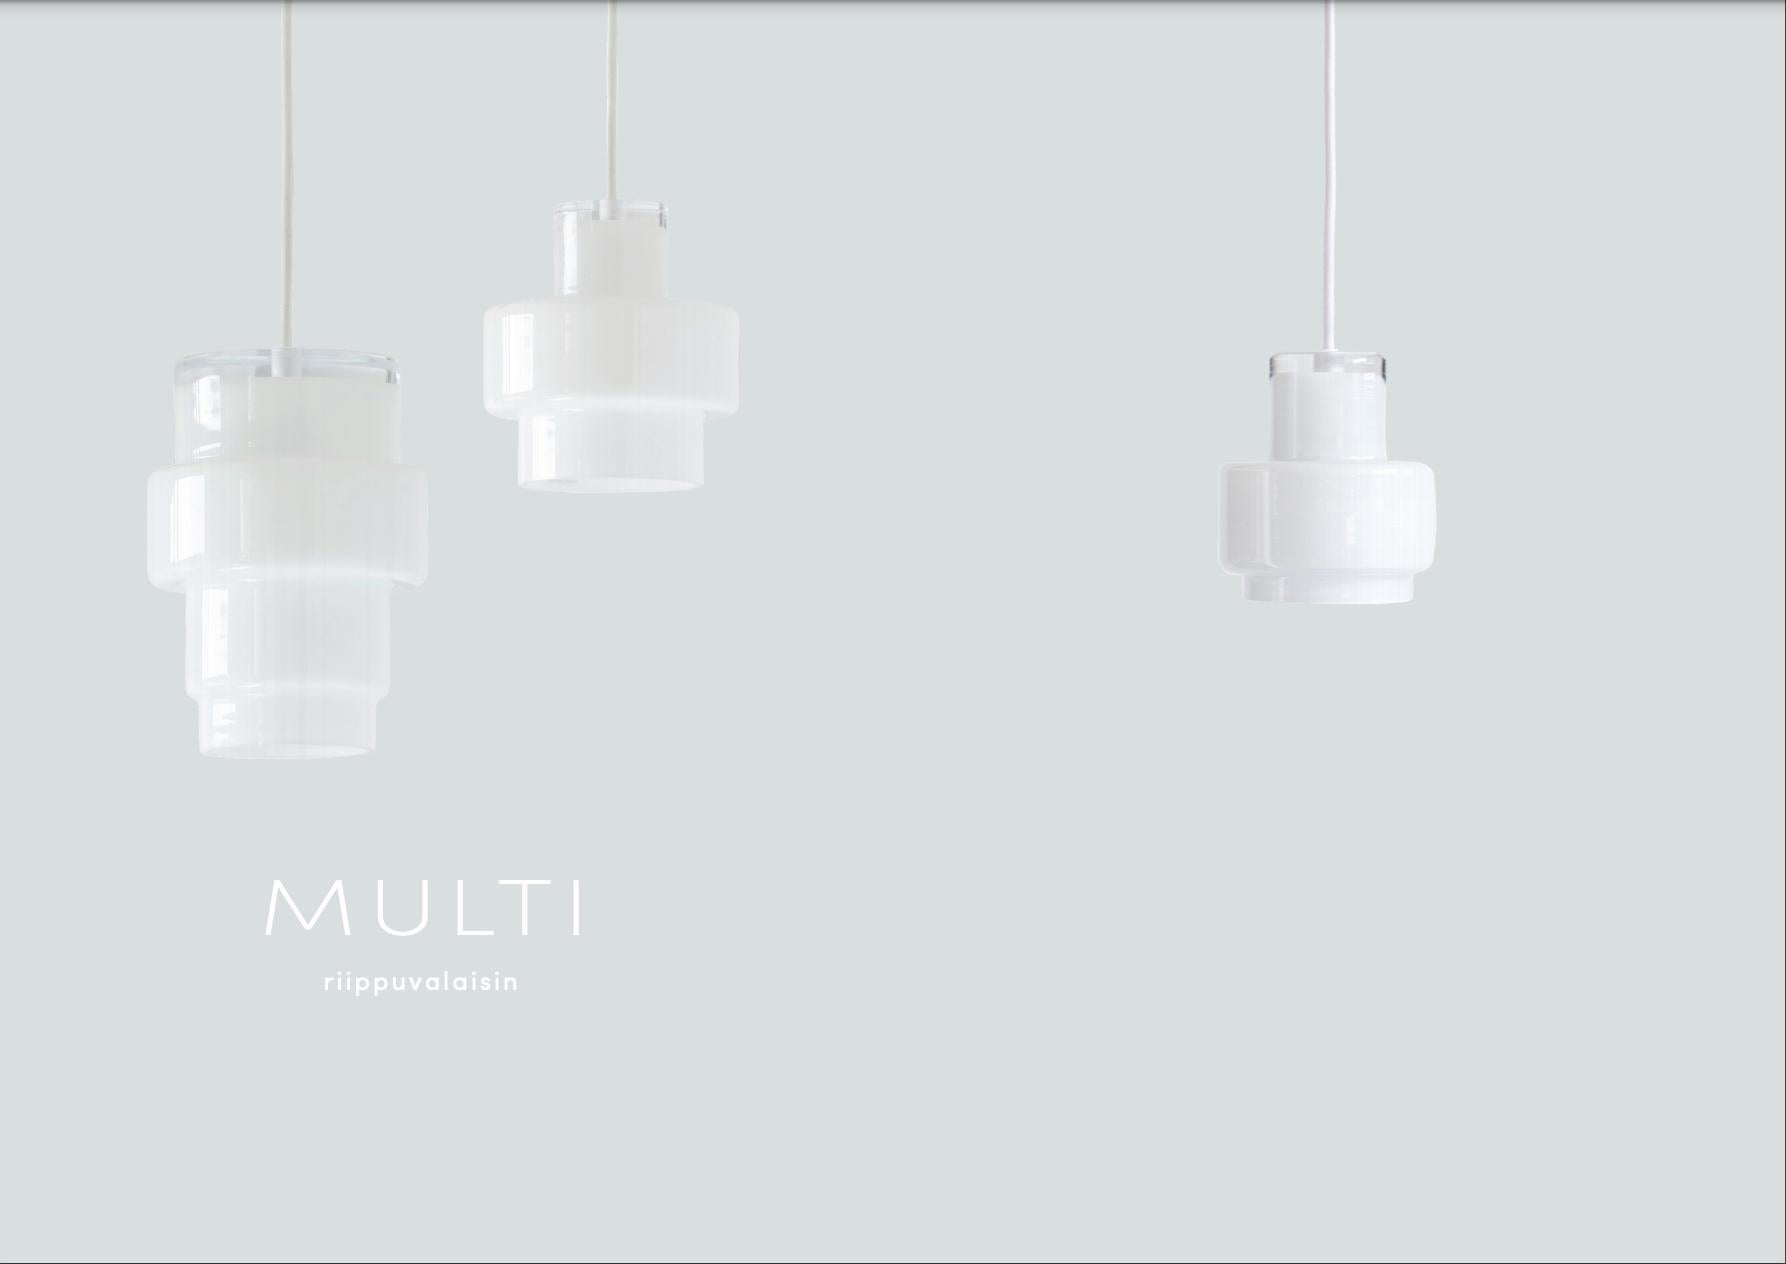 'Multi S' glass pendant by Jokinen and Konu for Innolux. The award winning Multi glass collection is based on an artistically innovative form of modular glass blowing mold developed by the internationally acclaimed Finnish design team of Jukka